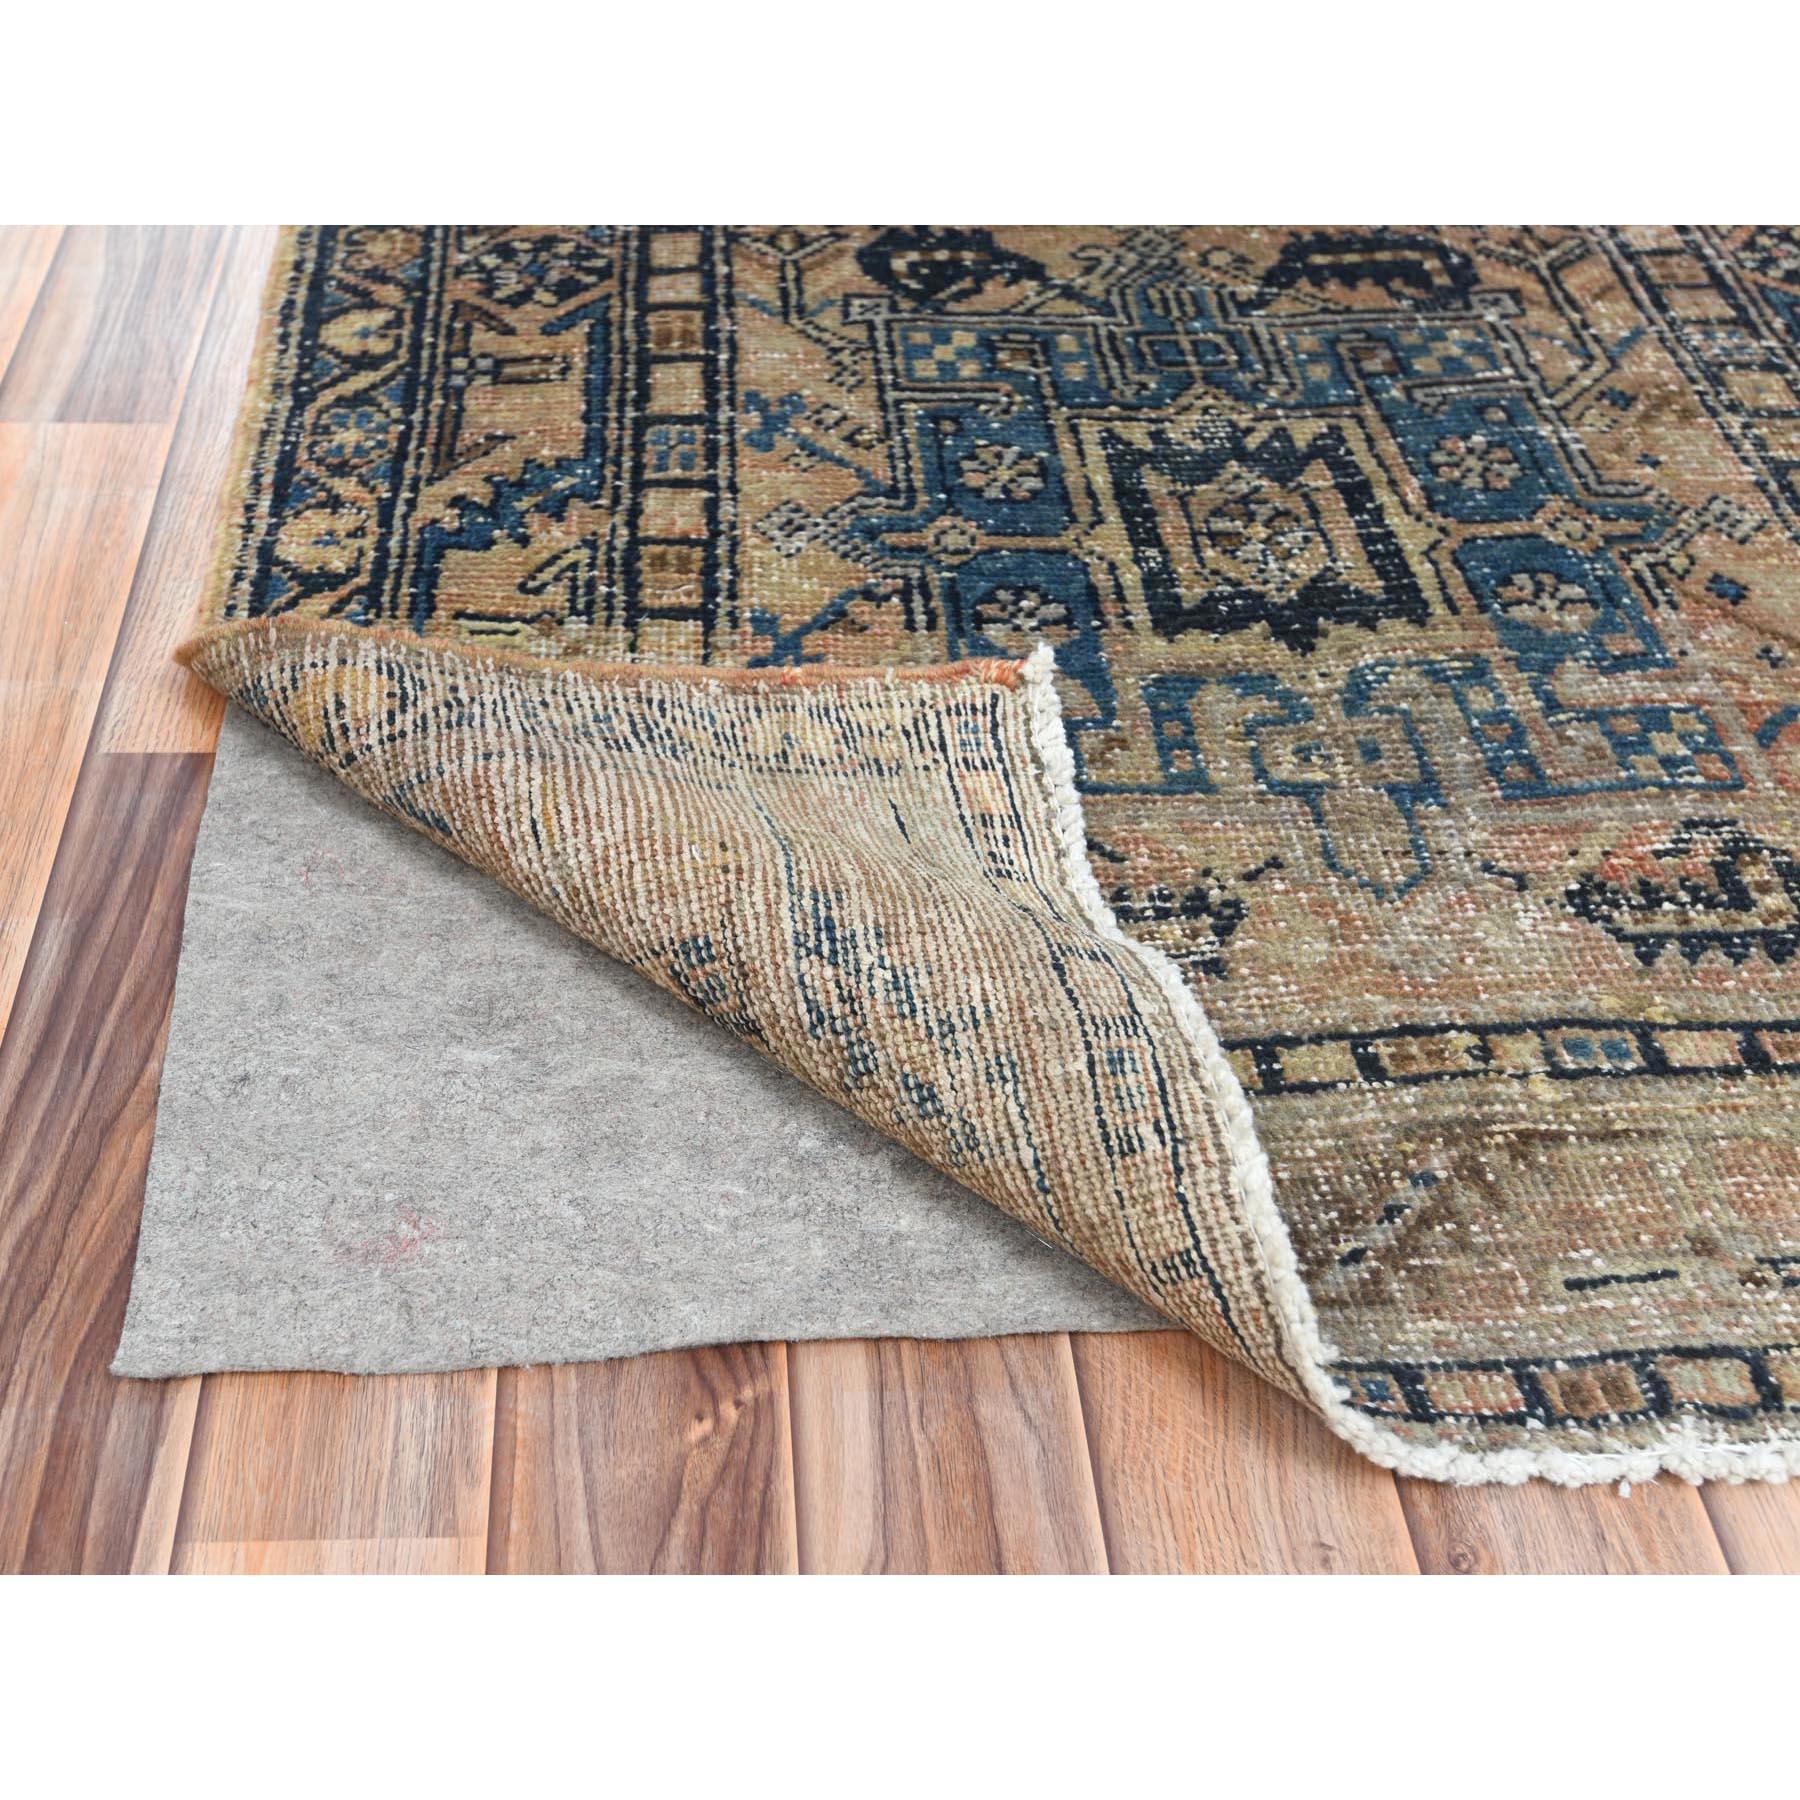 Medieval Sunset Colors Vintage Persian Karajeh Distressed Look Worn Wool Hand Knotted Rug For Sale